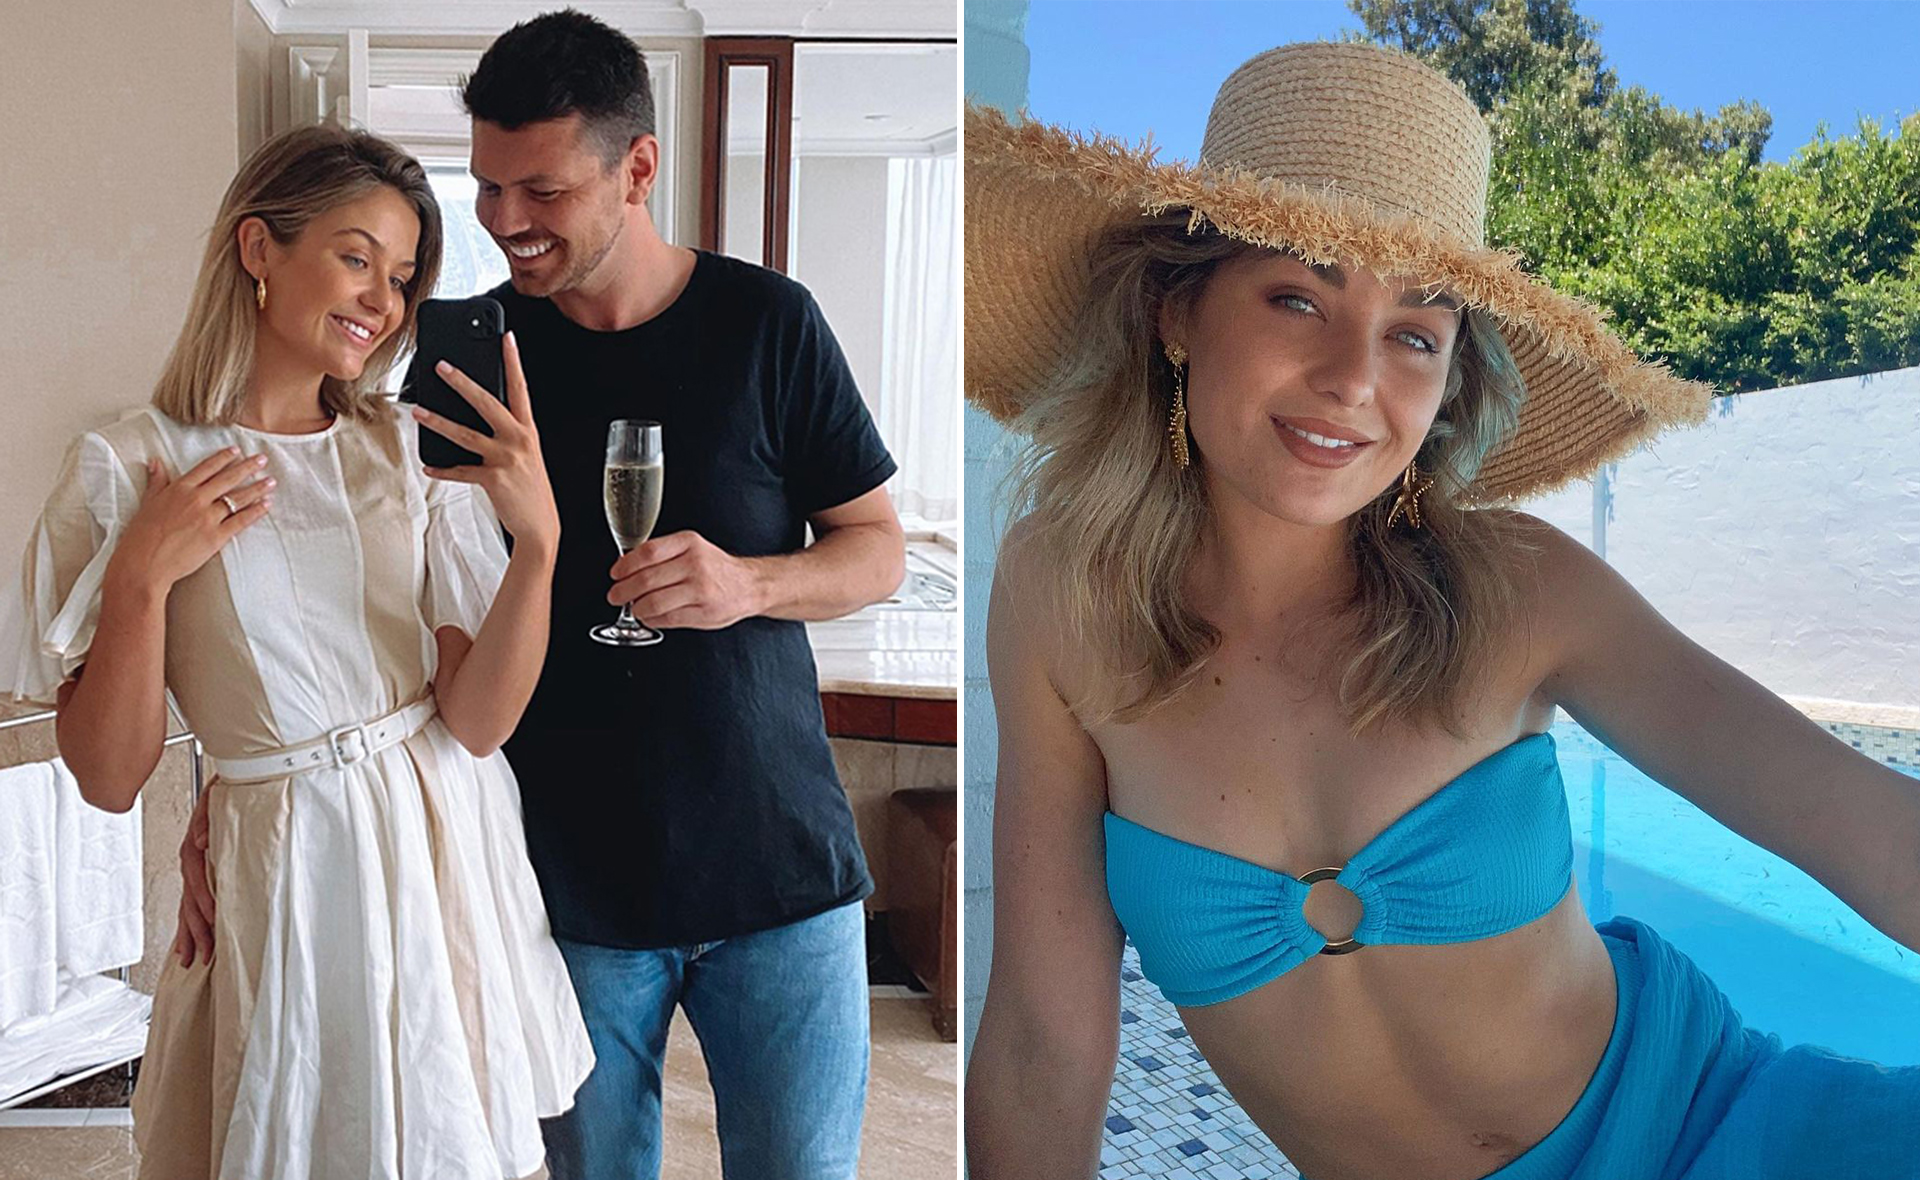 EXCLUSIVE: Bachelor star Sophie Tieman talks baby plans, details of her upcoming wedding and drifting away from co-stars